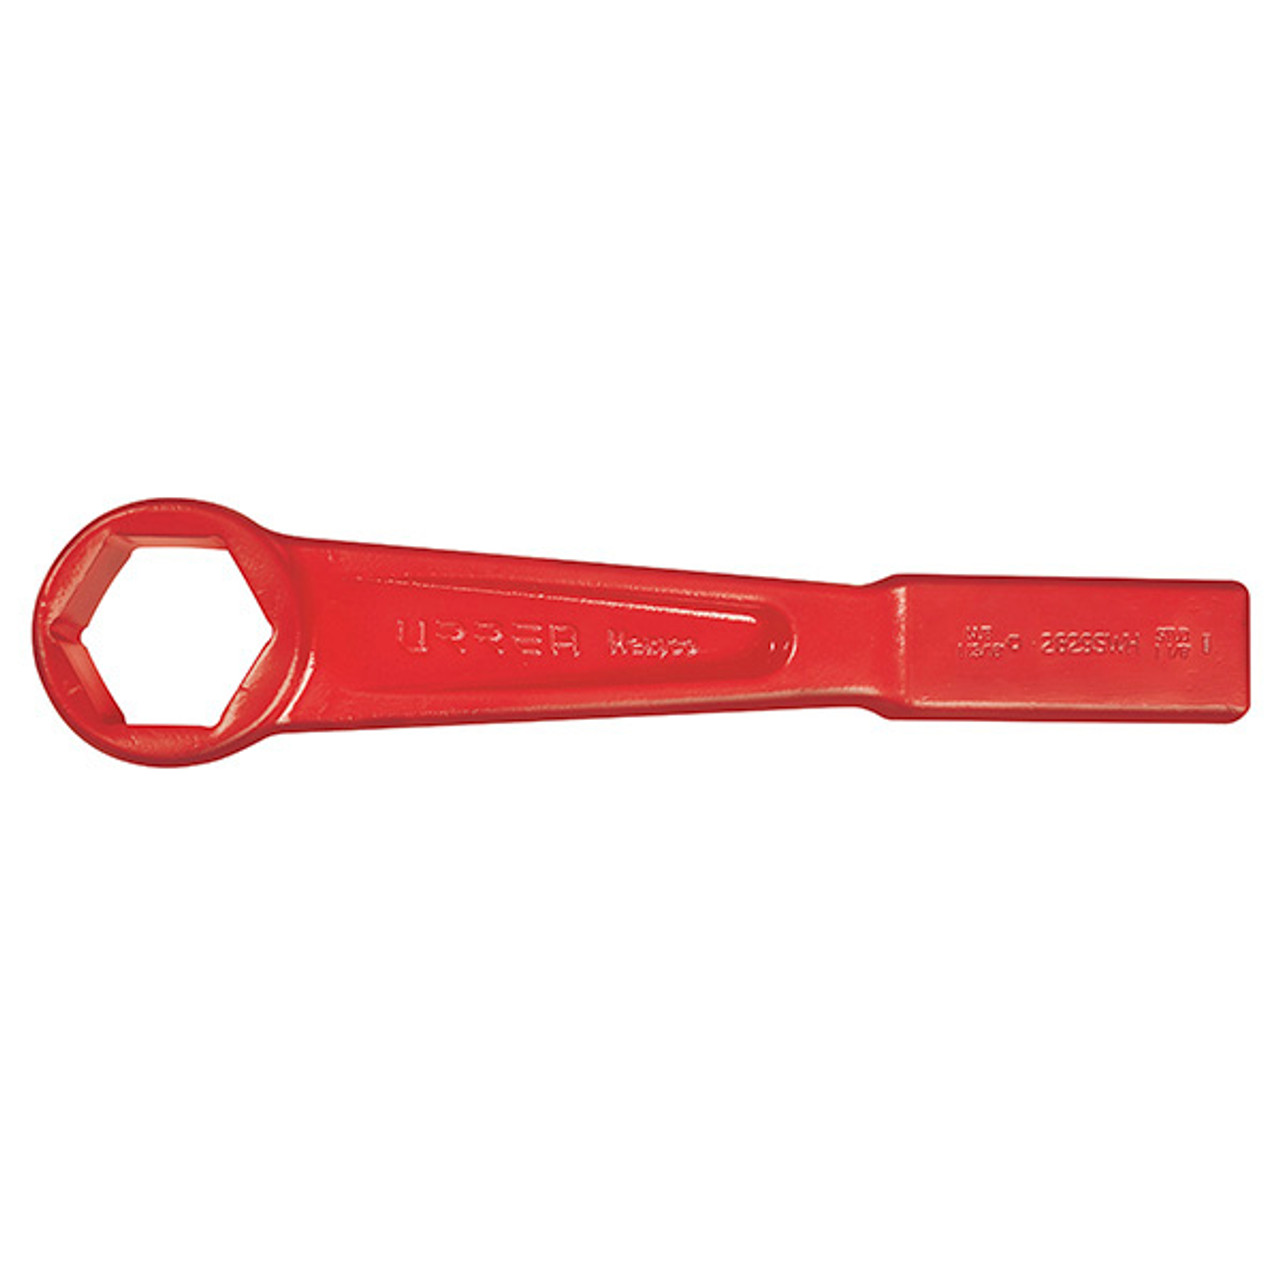 URREA 6-Point Thin Wall Striking Wrench - 1-1/16? Flat Strike Wrench with Straight Pattern Design & Low Clearance Head - 2817SWH